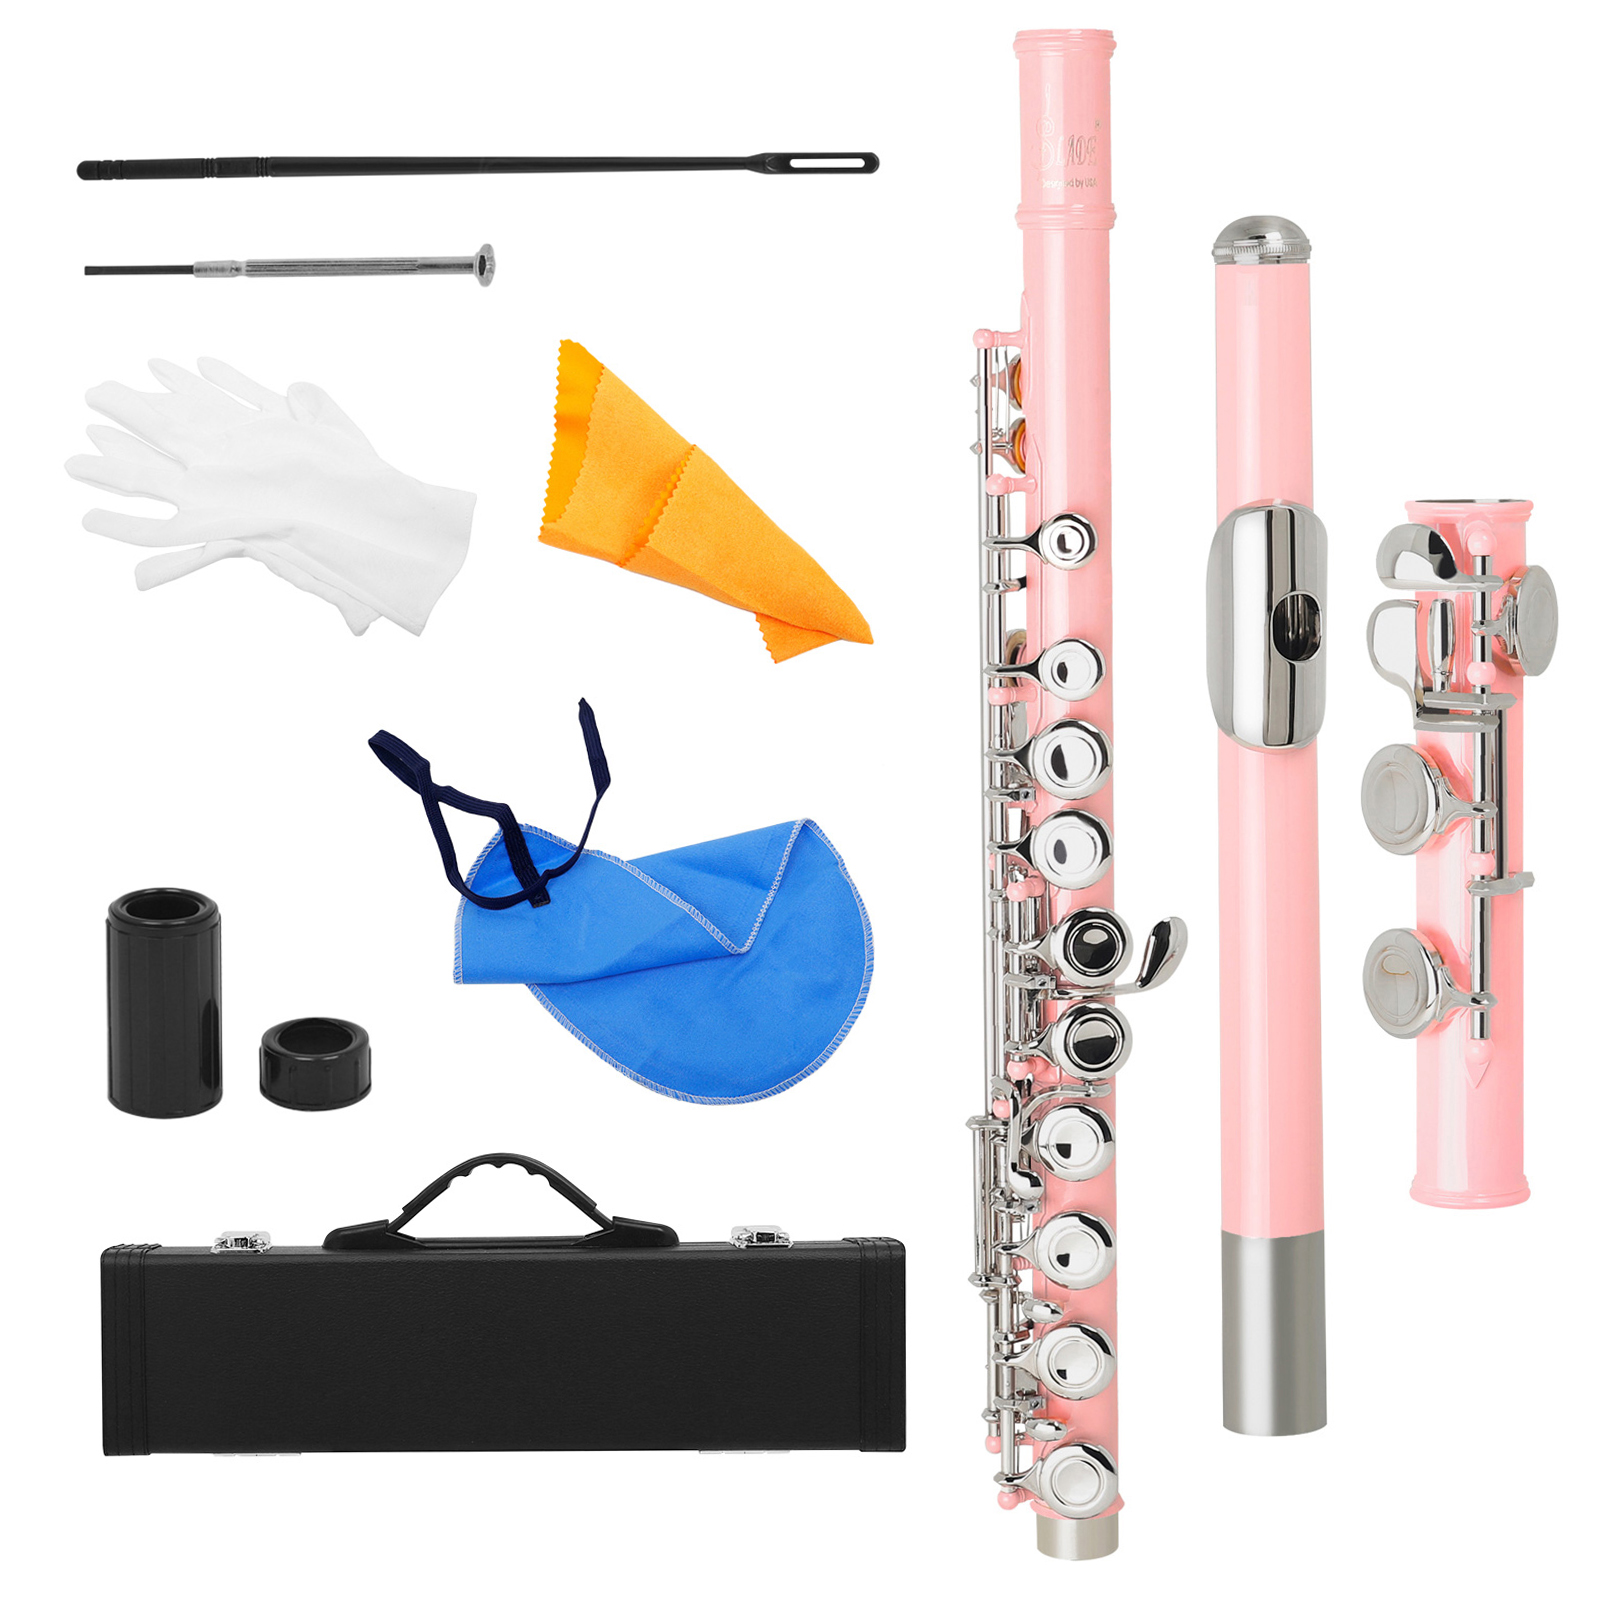 Western Concert Flute Cupronickel Nicke Plated 16 Holes C Key Woodwind Instrument with Cleaning Cloth Stick Gloves Mini Screwdriver Padded Case 